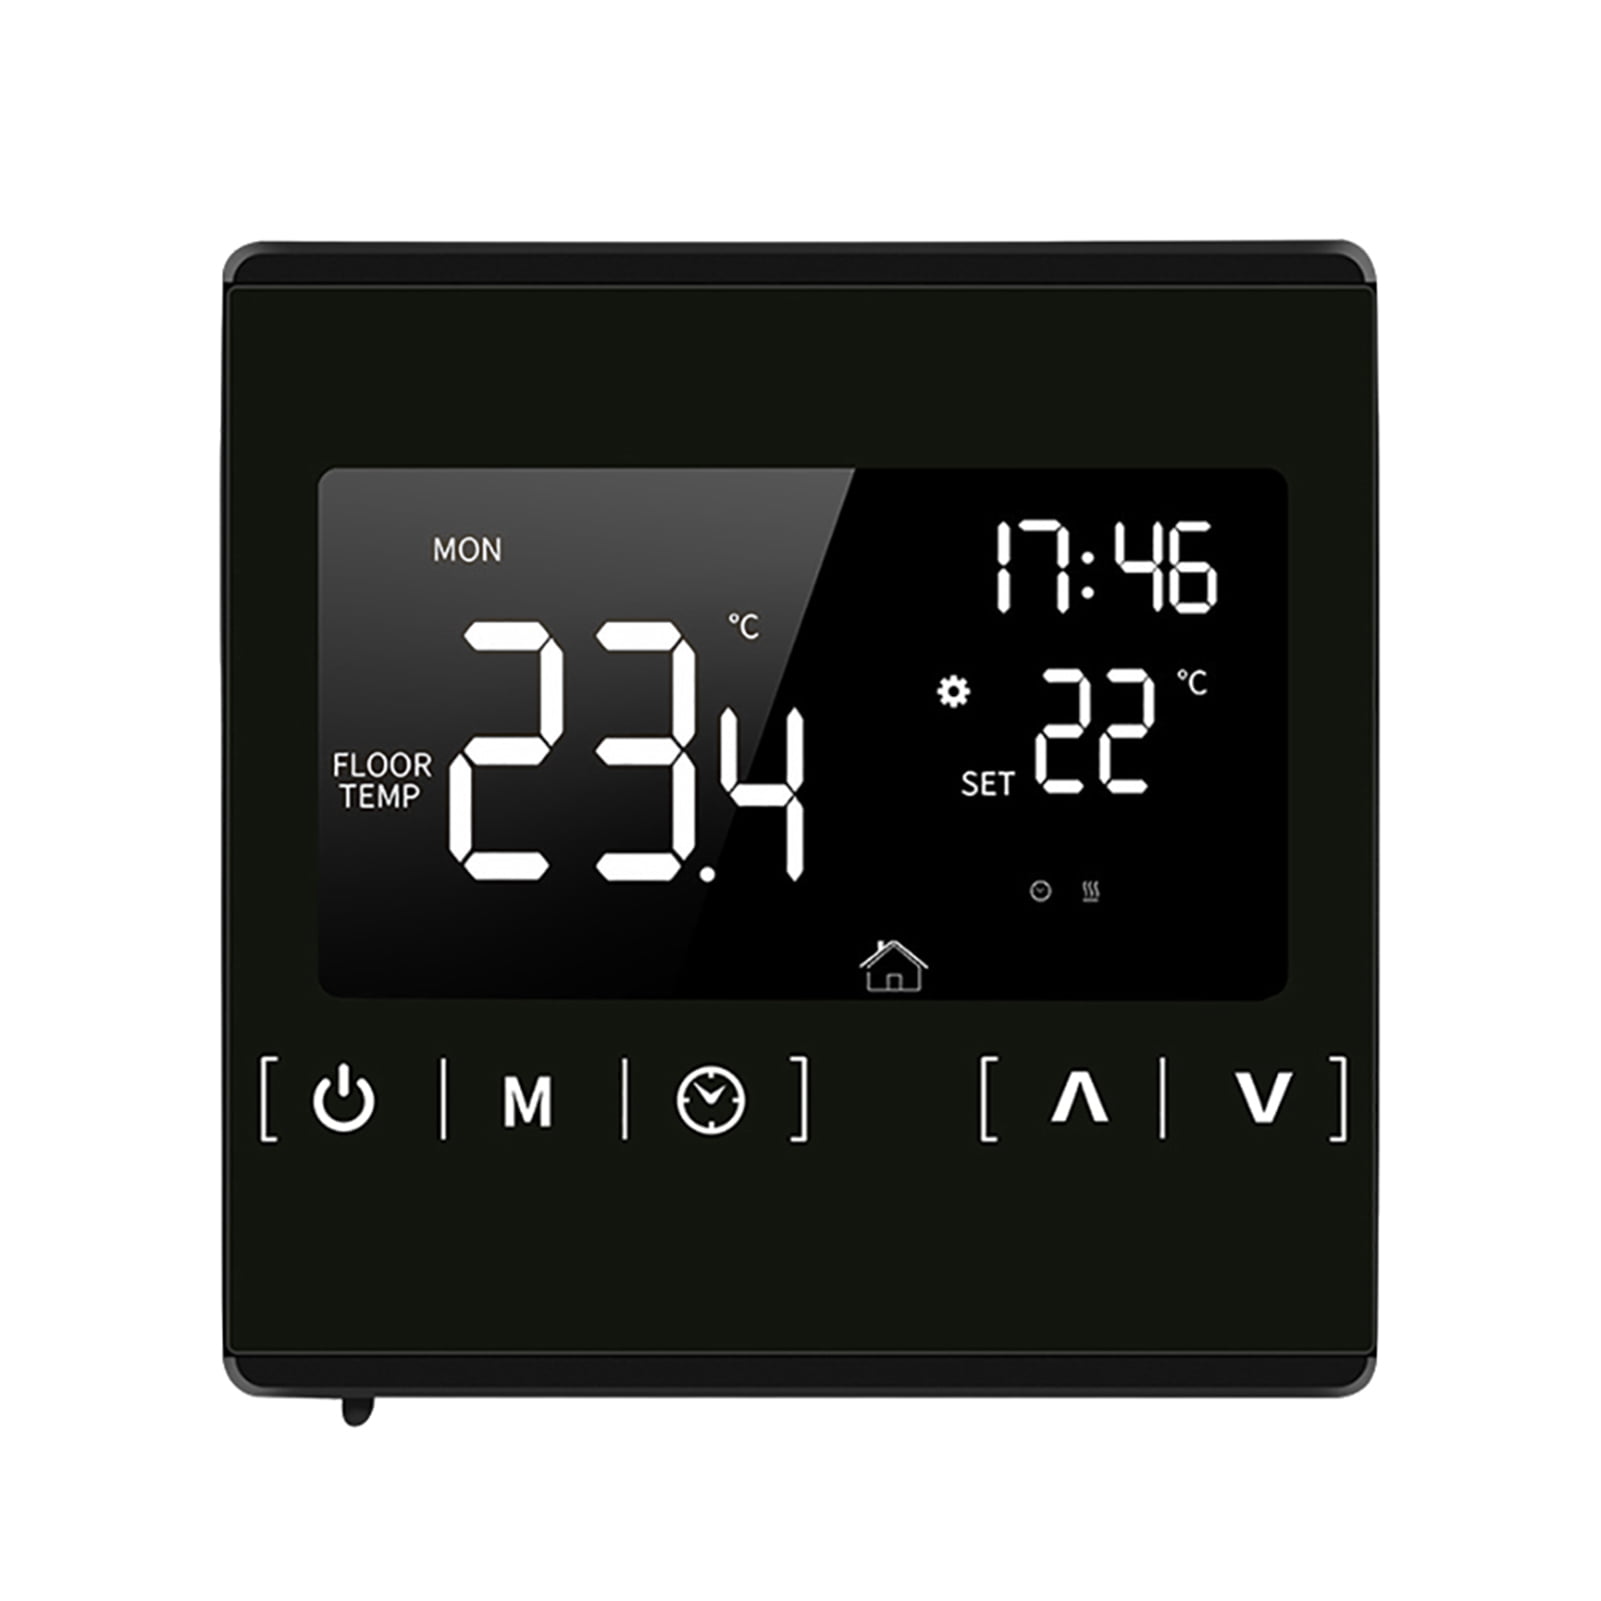 Thermostat Heating Programmable Screen Touch Floor Touchscreen Heat Temperature